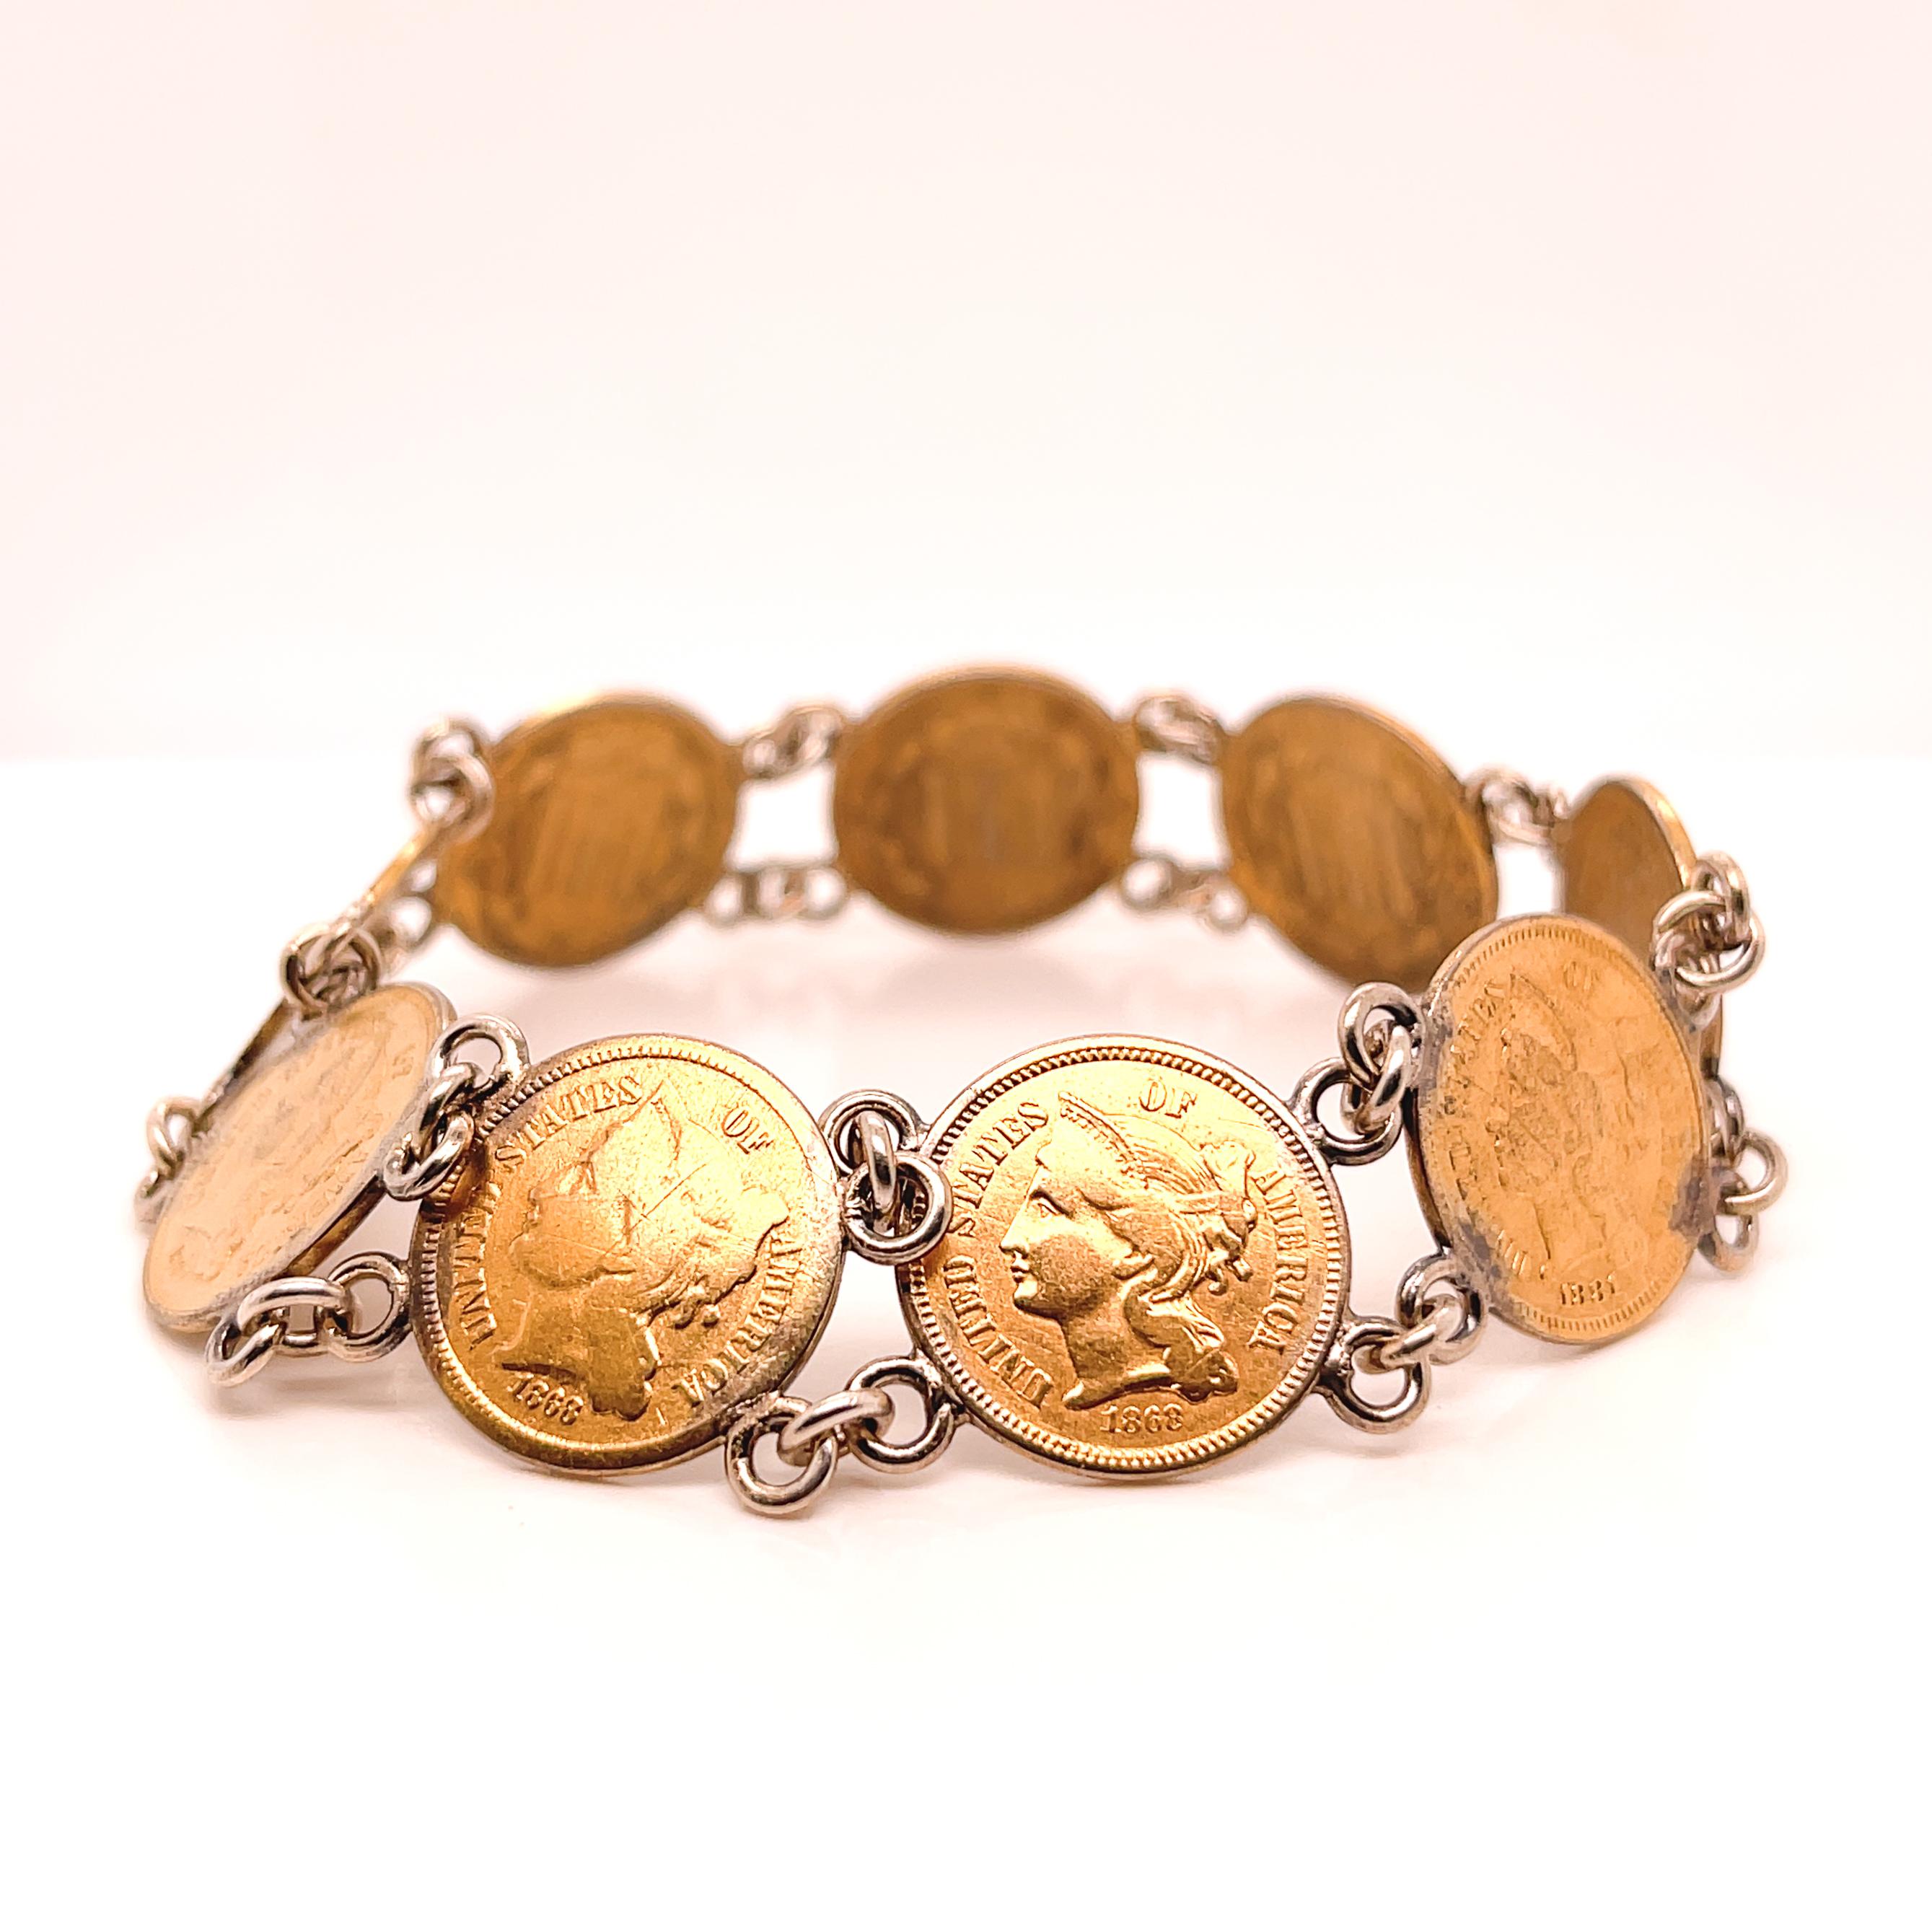 Women's or Men's Antique Coin Bracelet with Gold Plated American 3 Cent Nickel Coins For Sale